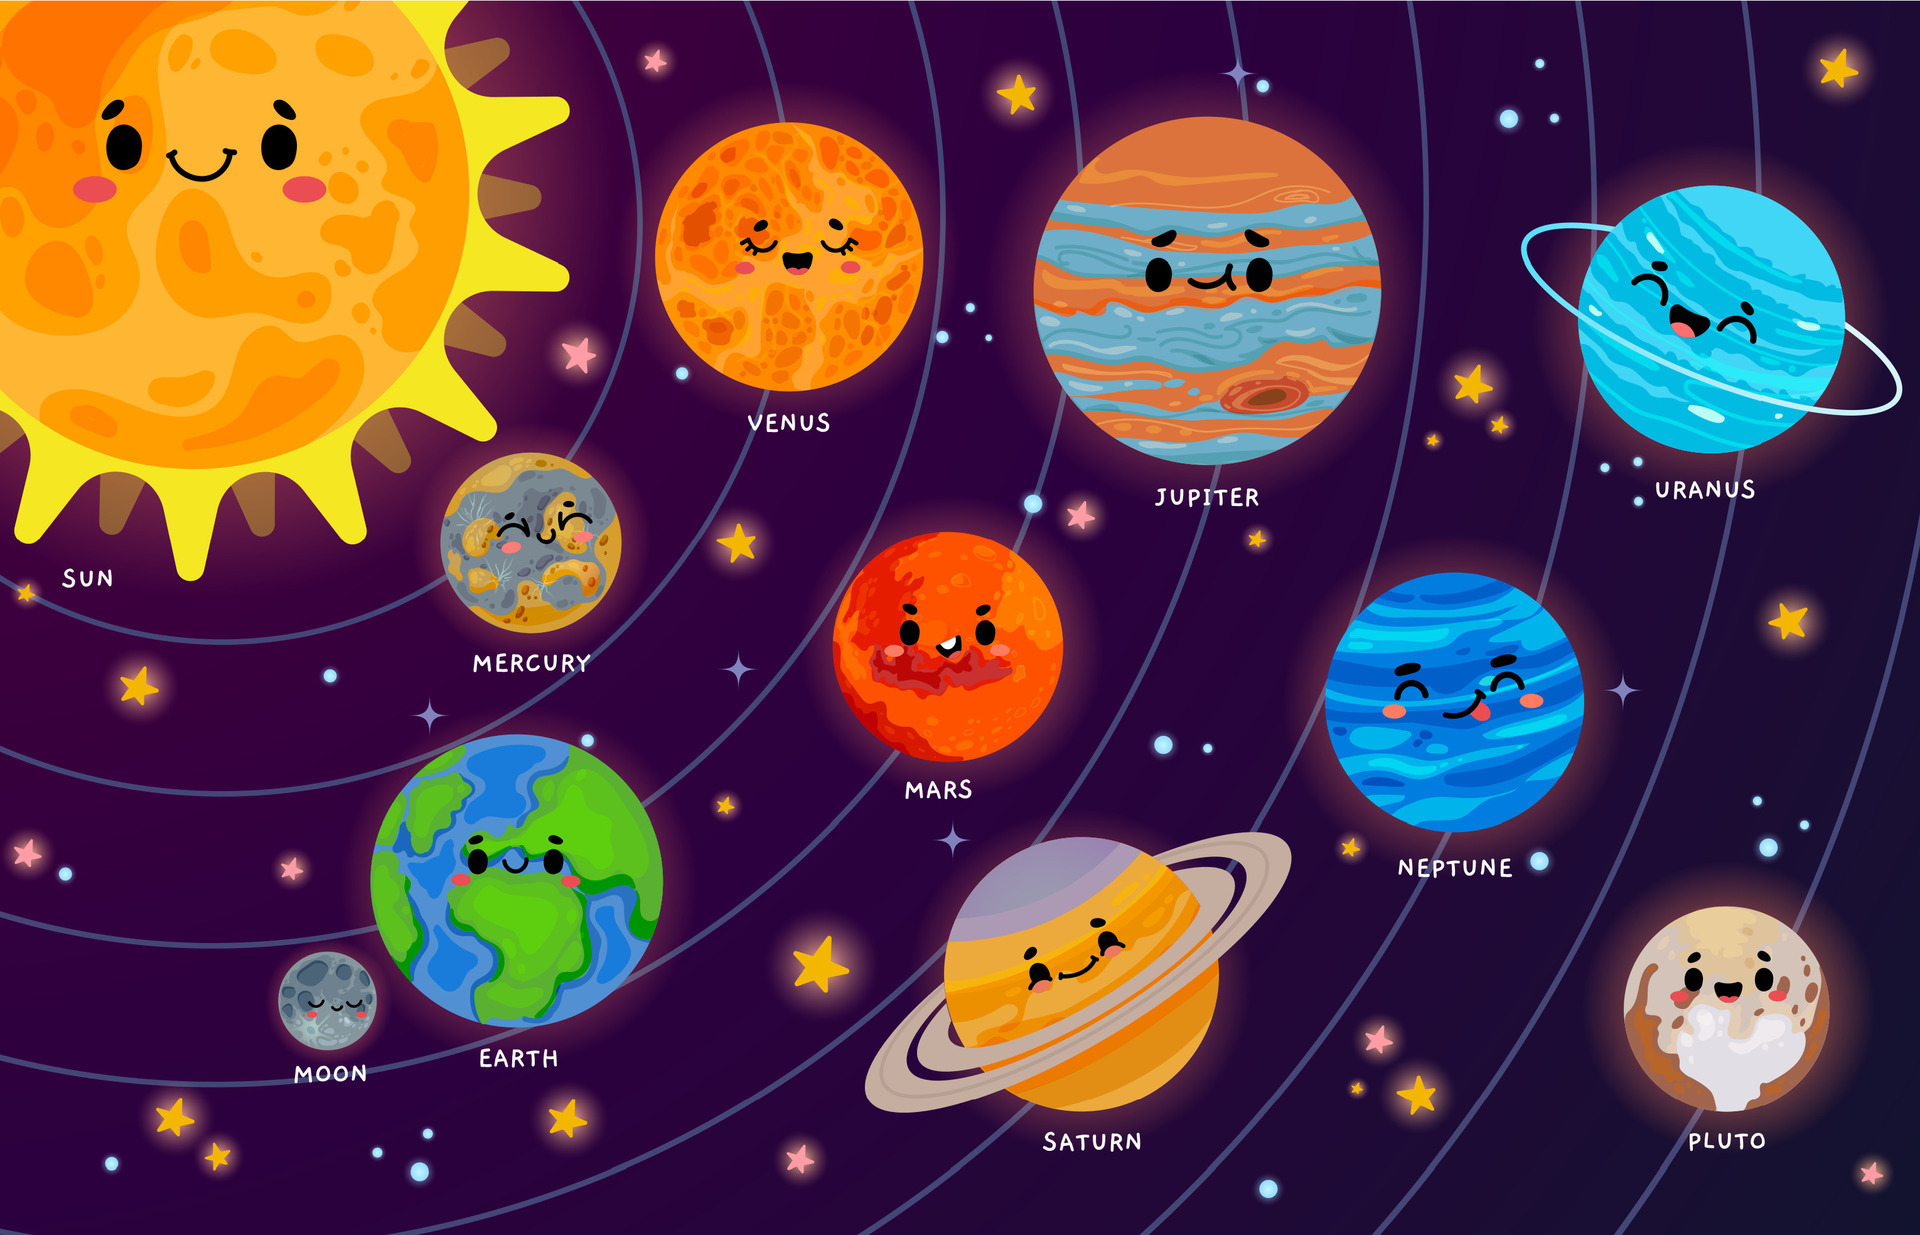 Kids Solar System Photos, Images and Pictures